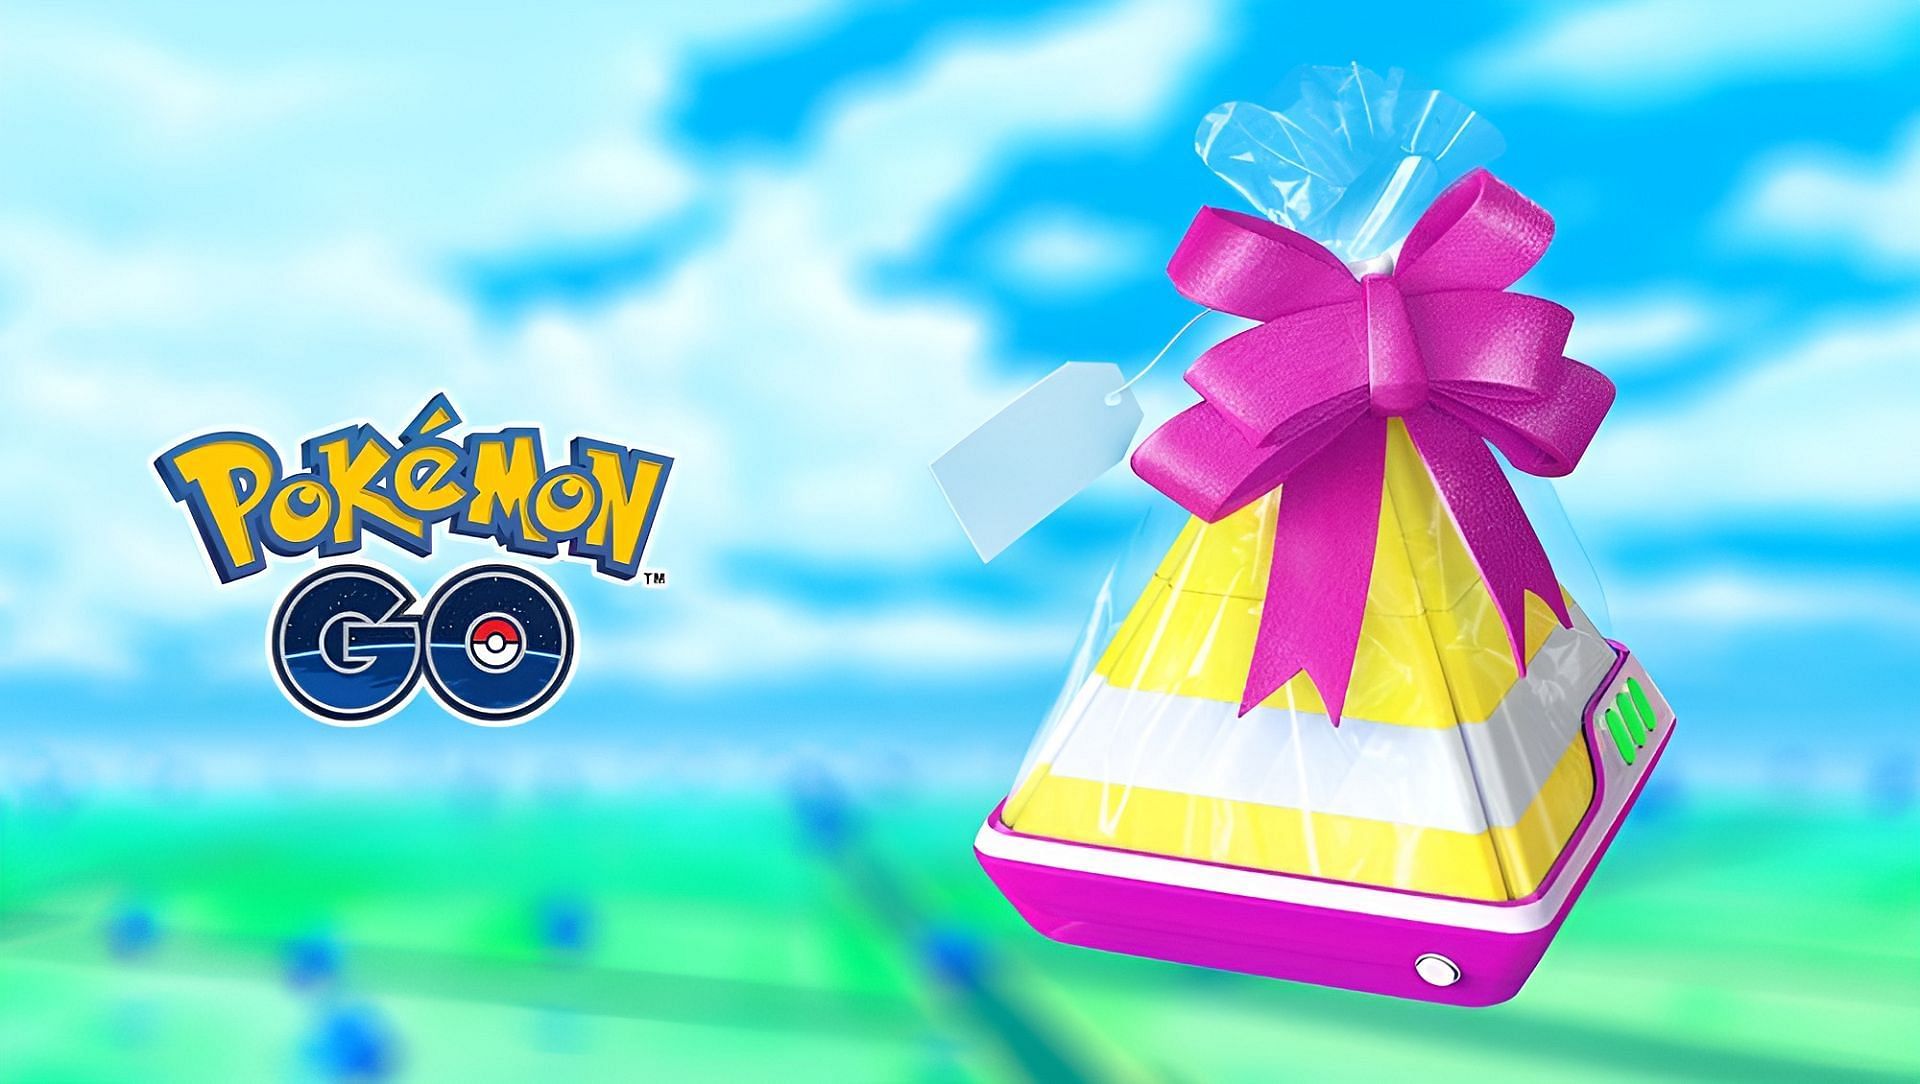 Many Pokemon GO fans have lamented the daily limit on opening gifts from friends (Image via Niantic)